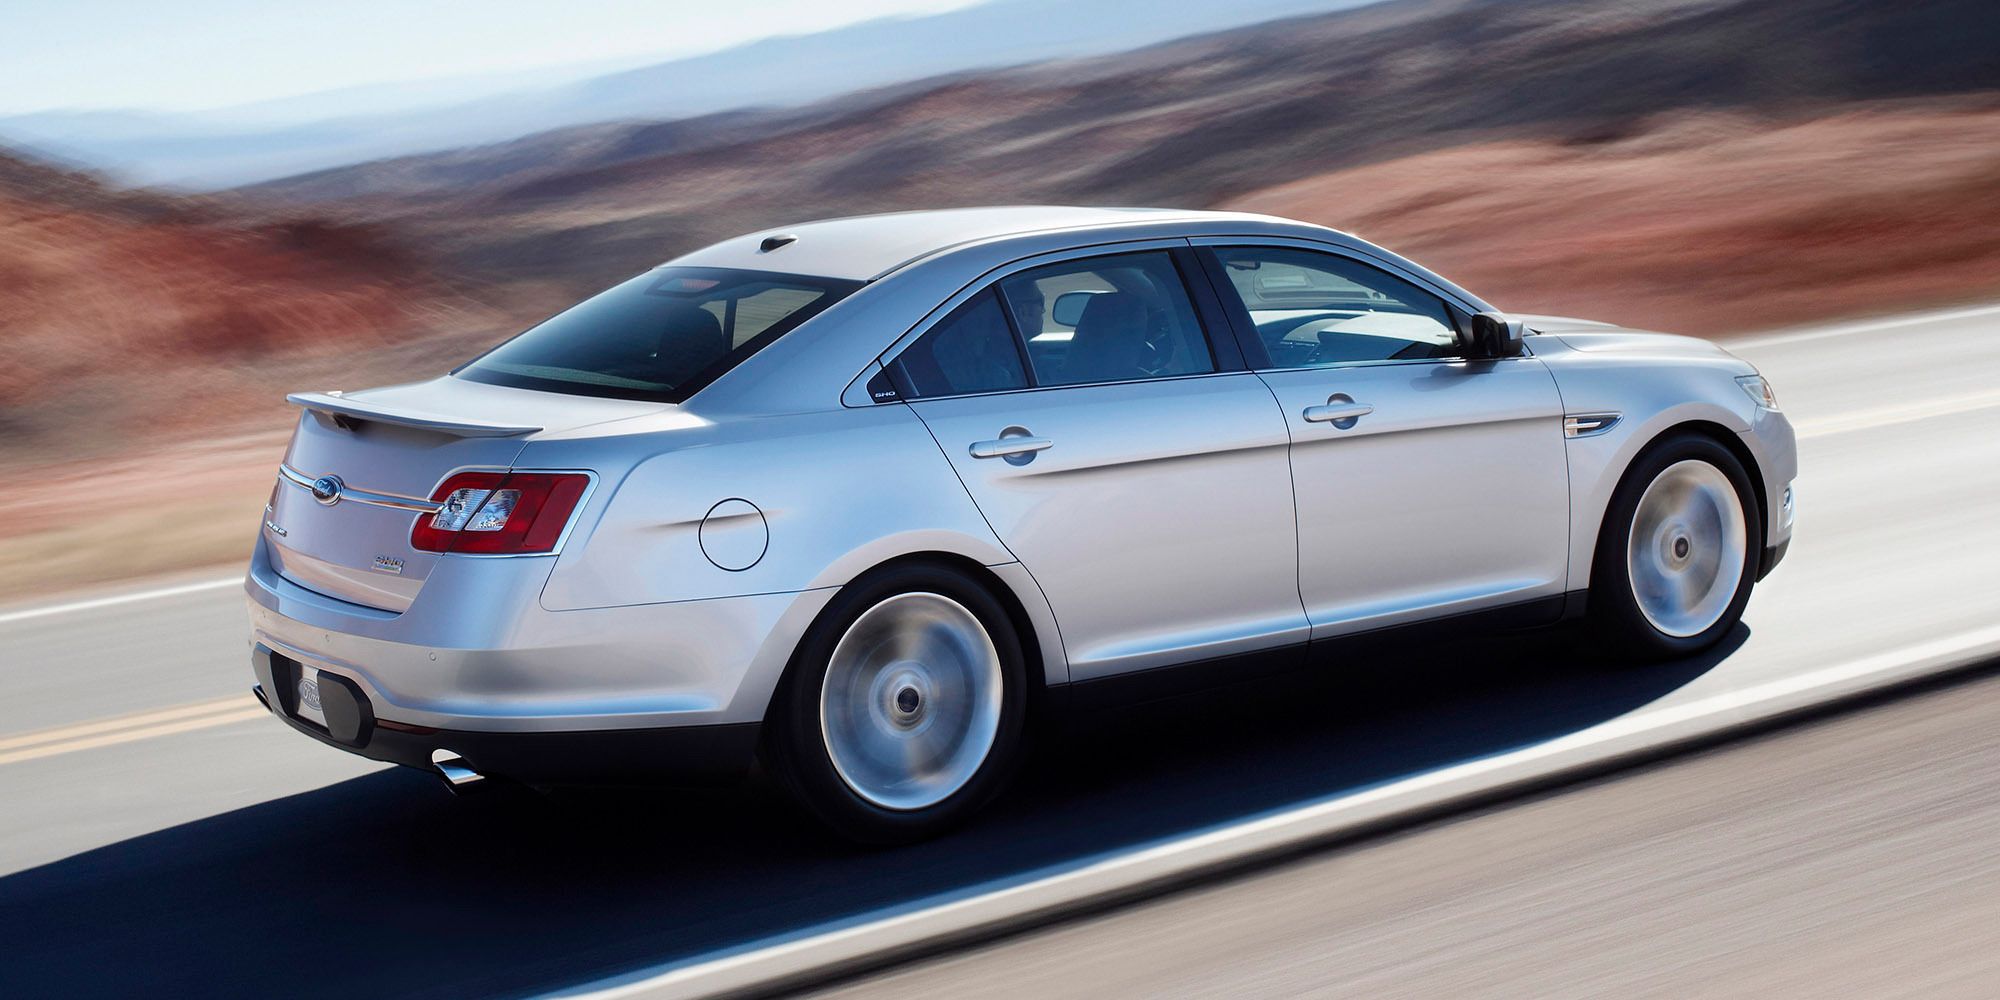 Side view of a silver Taurus SHO on the move